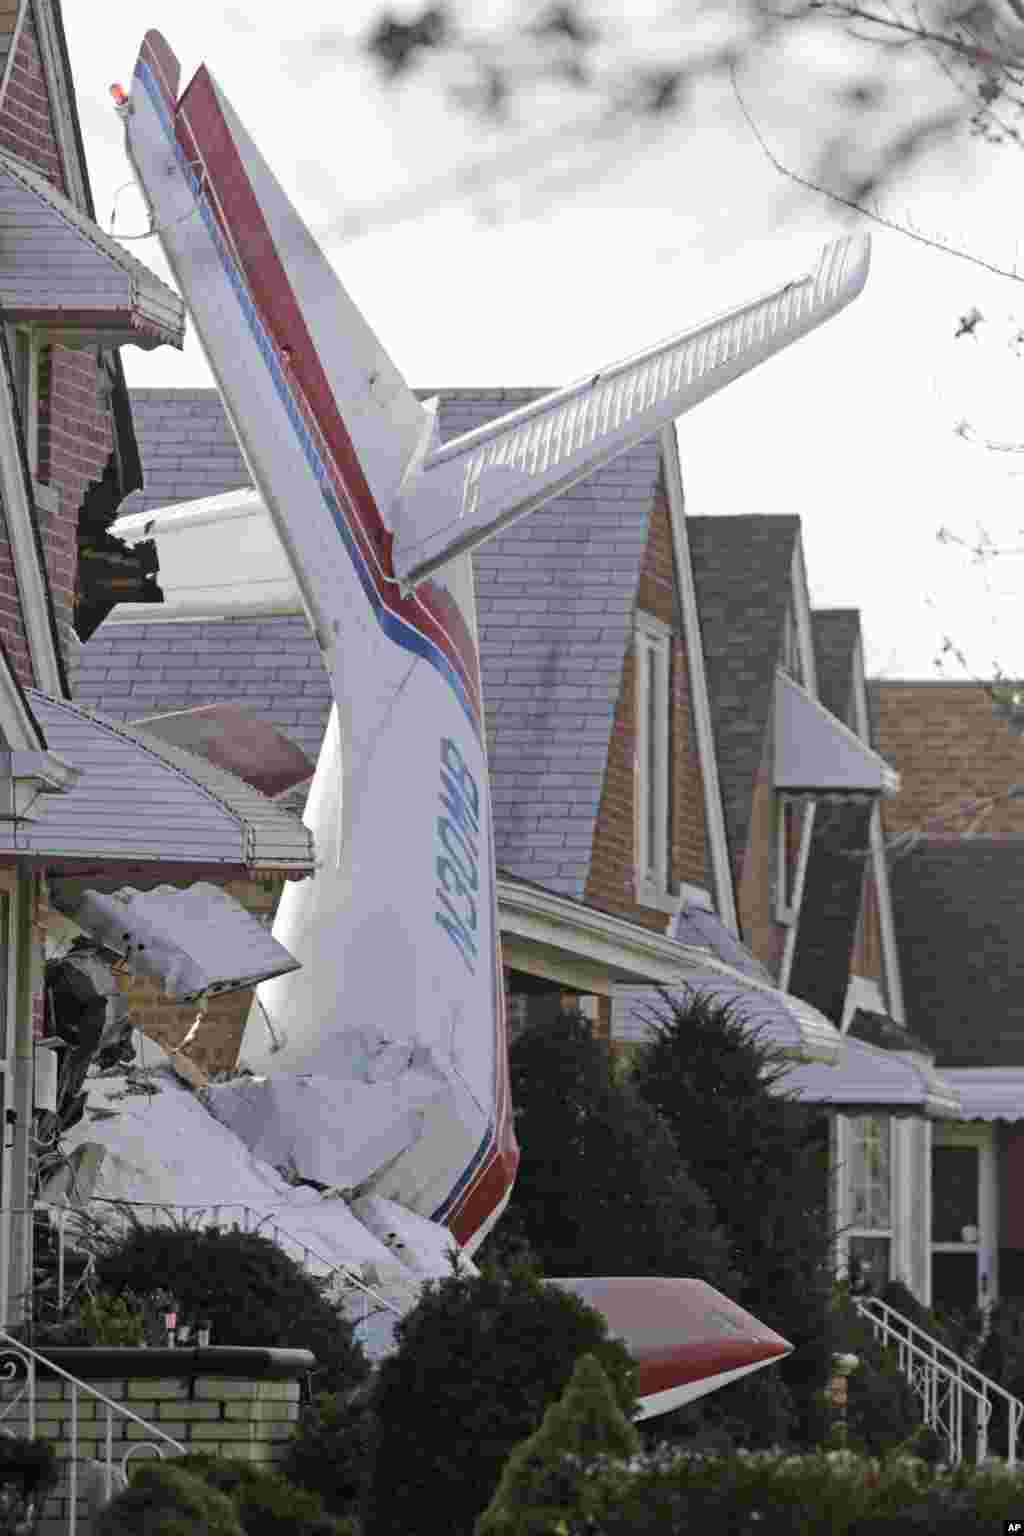 The wreckage of a small twin-engine cargo plane lies where the aircraft crashed into a home on Chicago&#39;s southwest side. The Aero Commander 500 had taken off from Midway International Airport and it slammed into the front of the home and plunged into the basement.